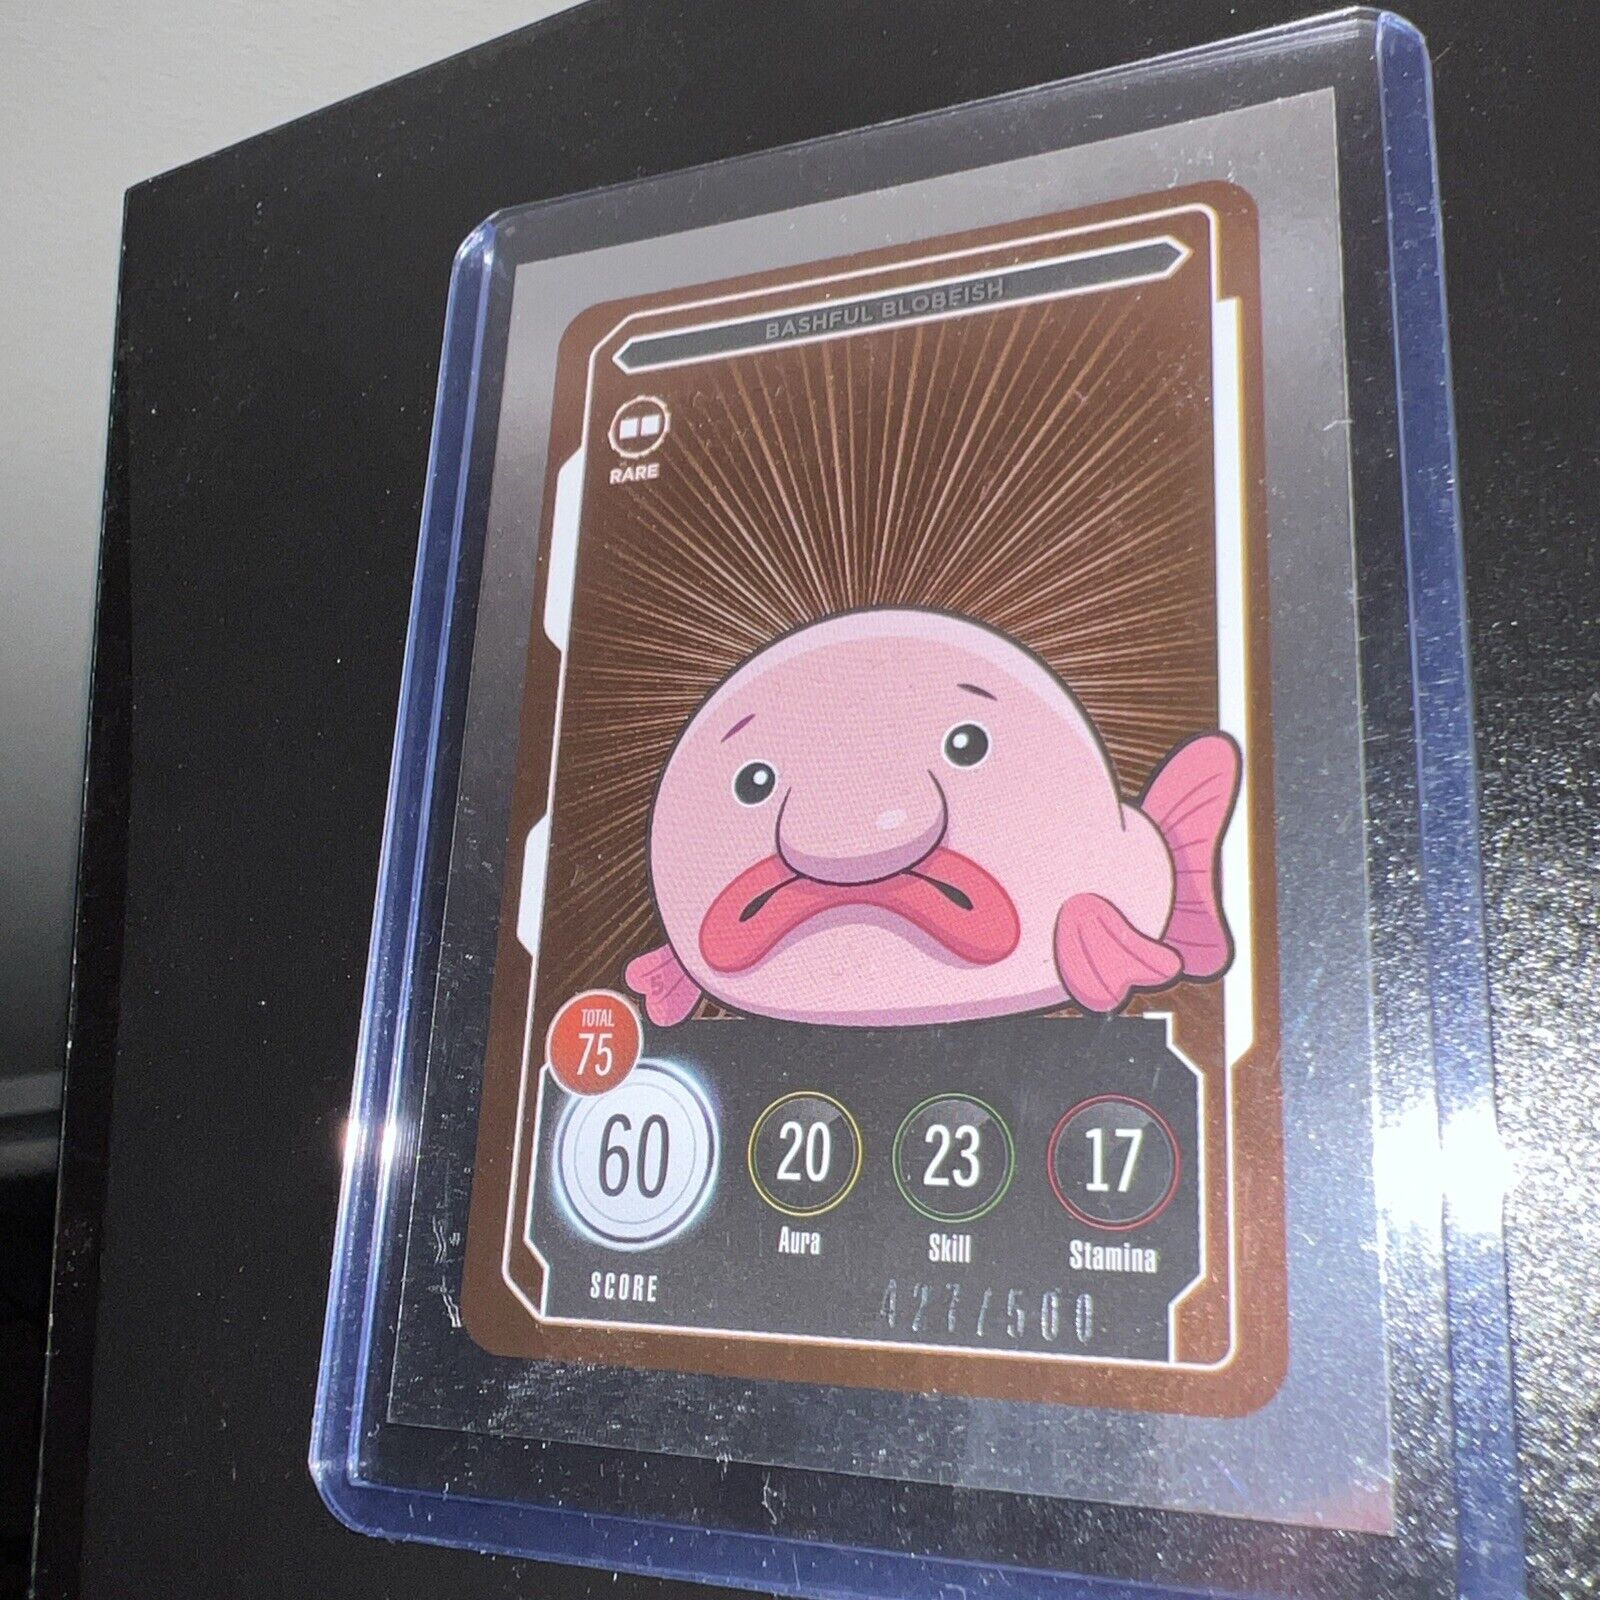 Rare Bashful Blobfish 427/500 | VeeFriends Compete And Collect Series 2 Card